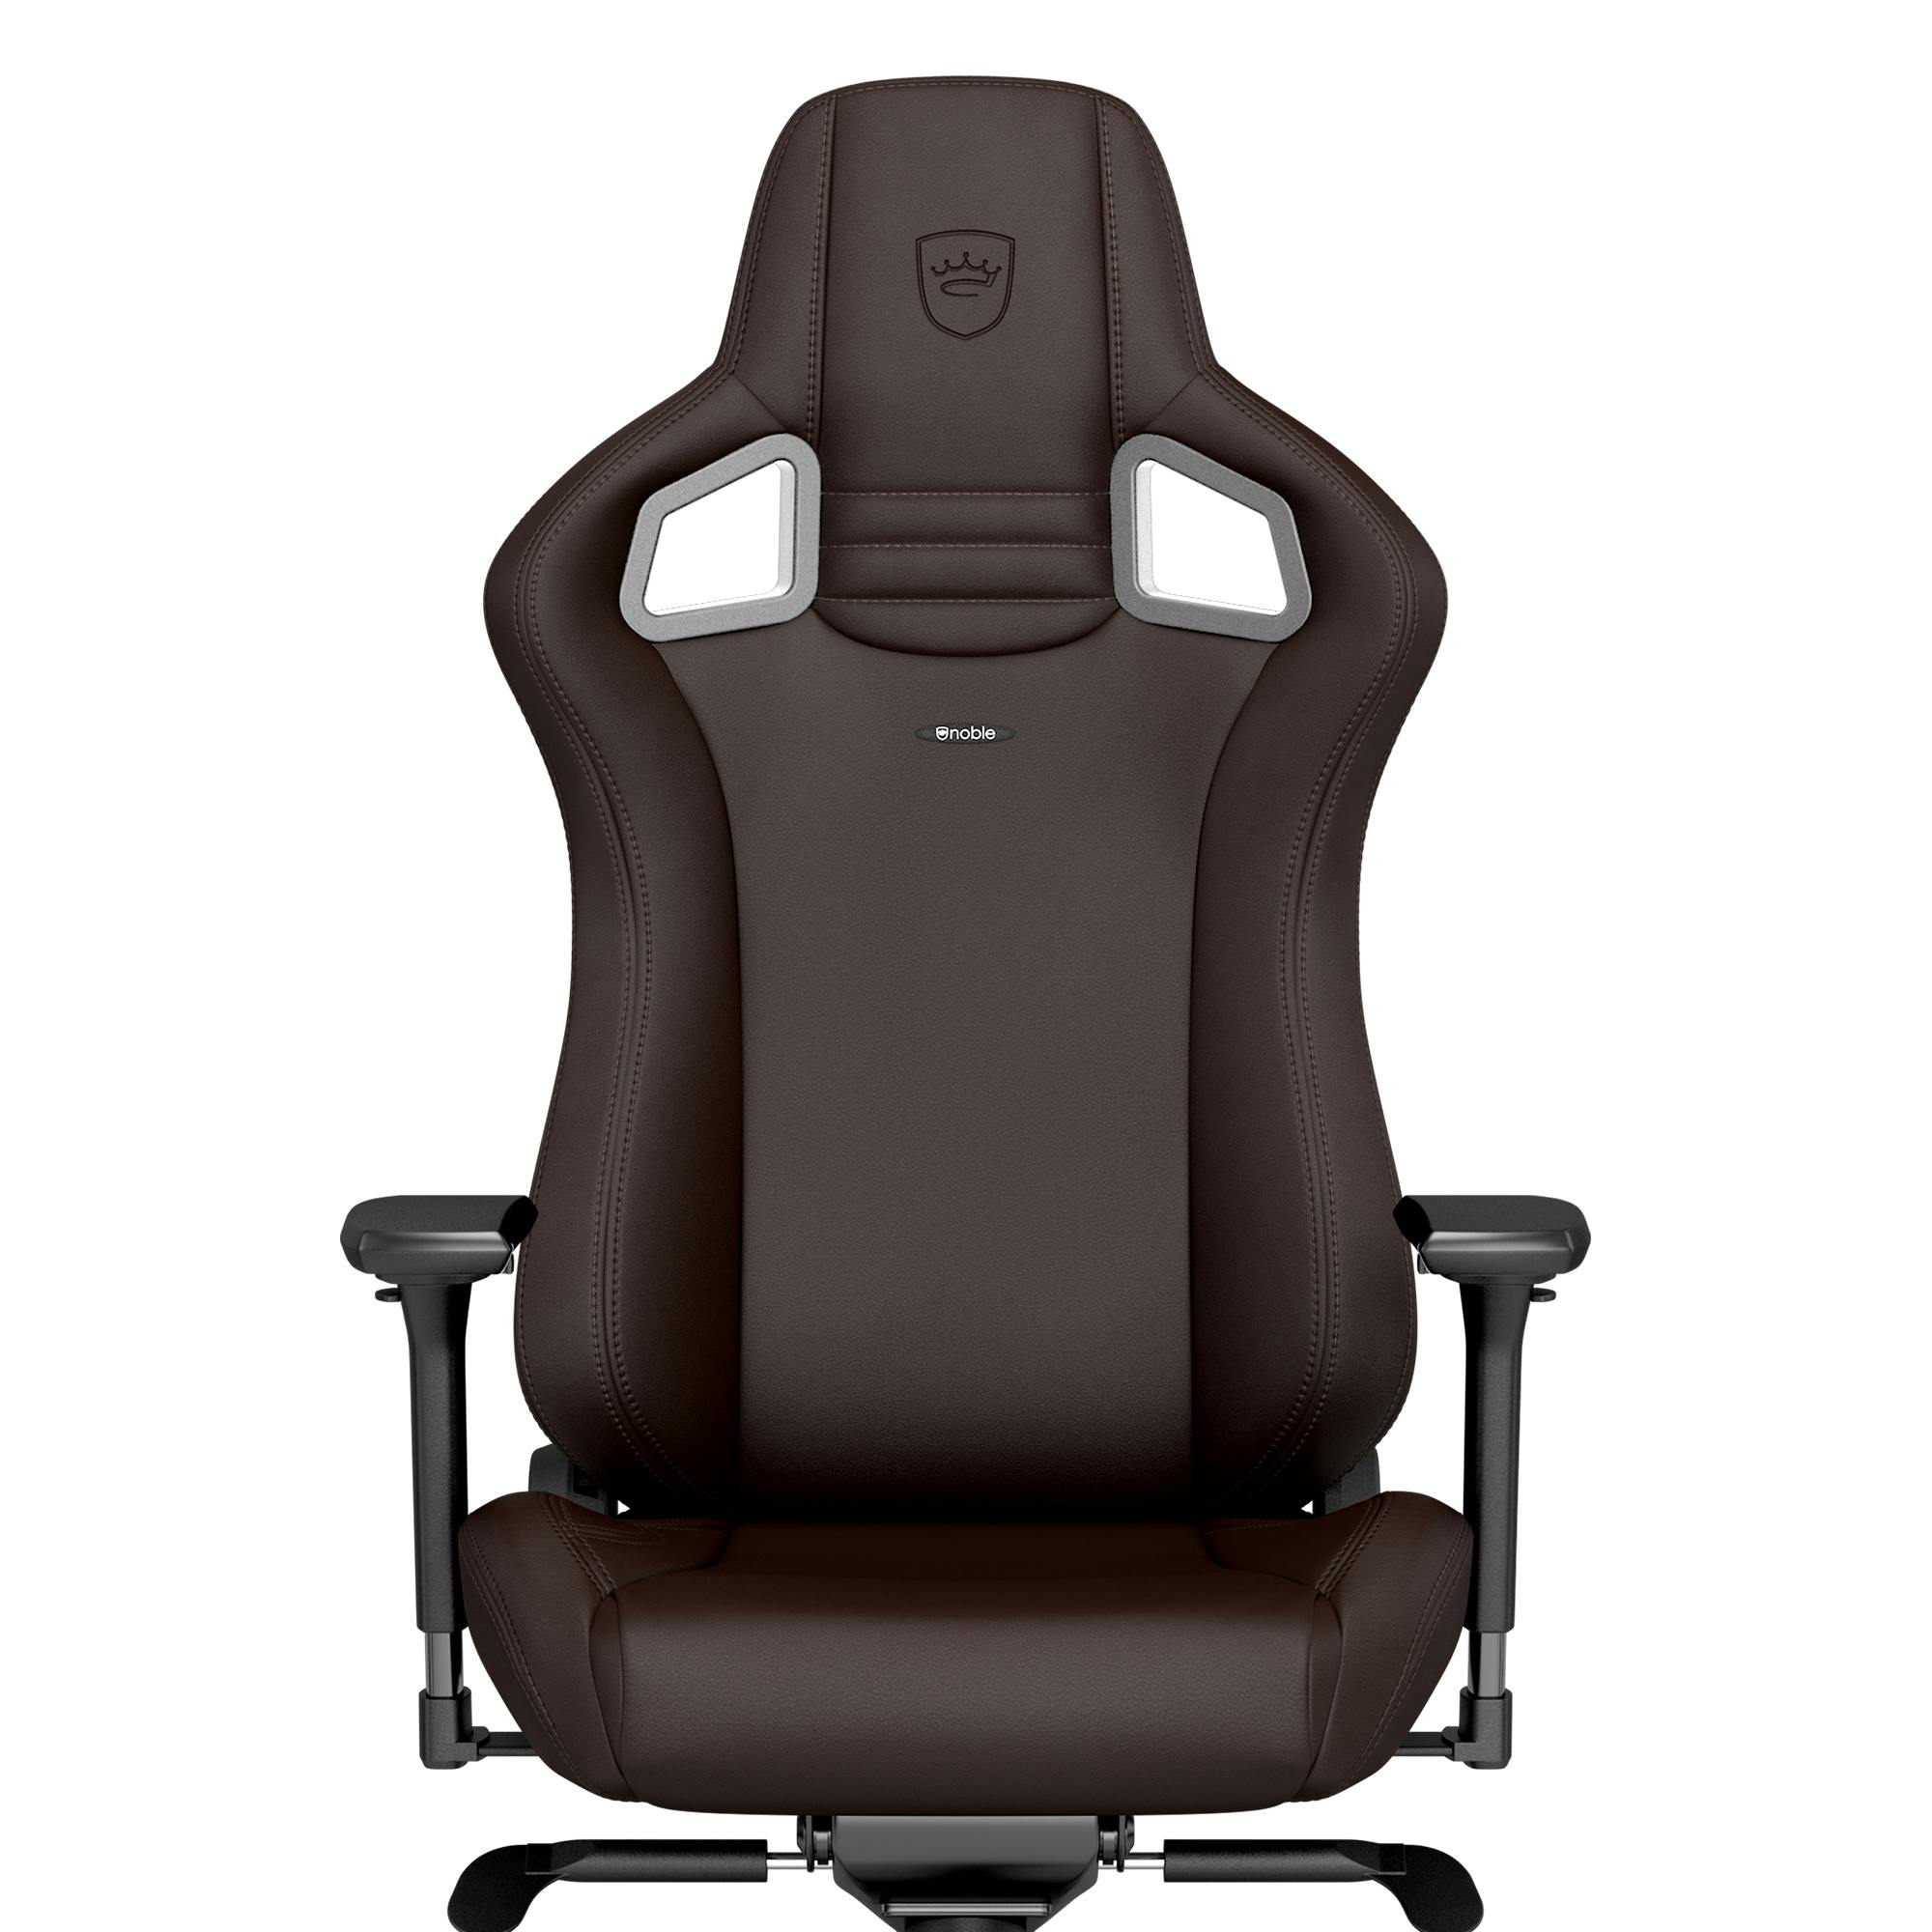 Noblechairs - EPIC Java Edition